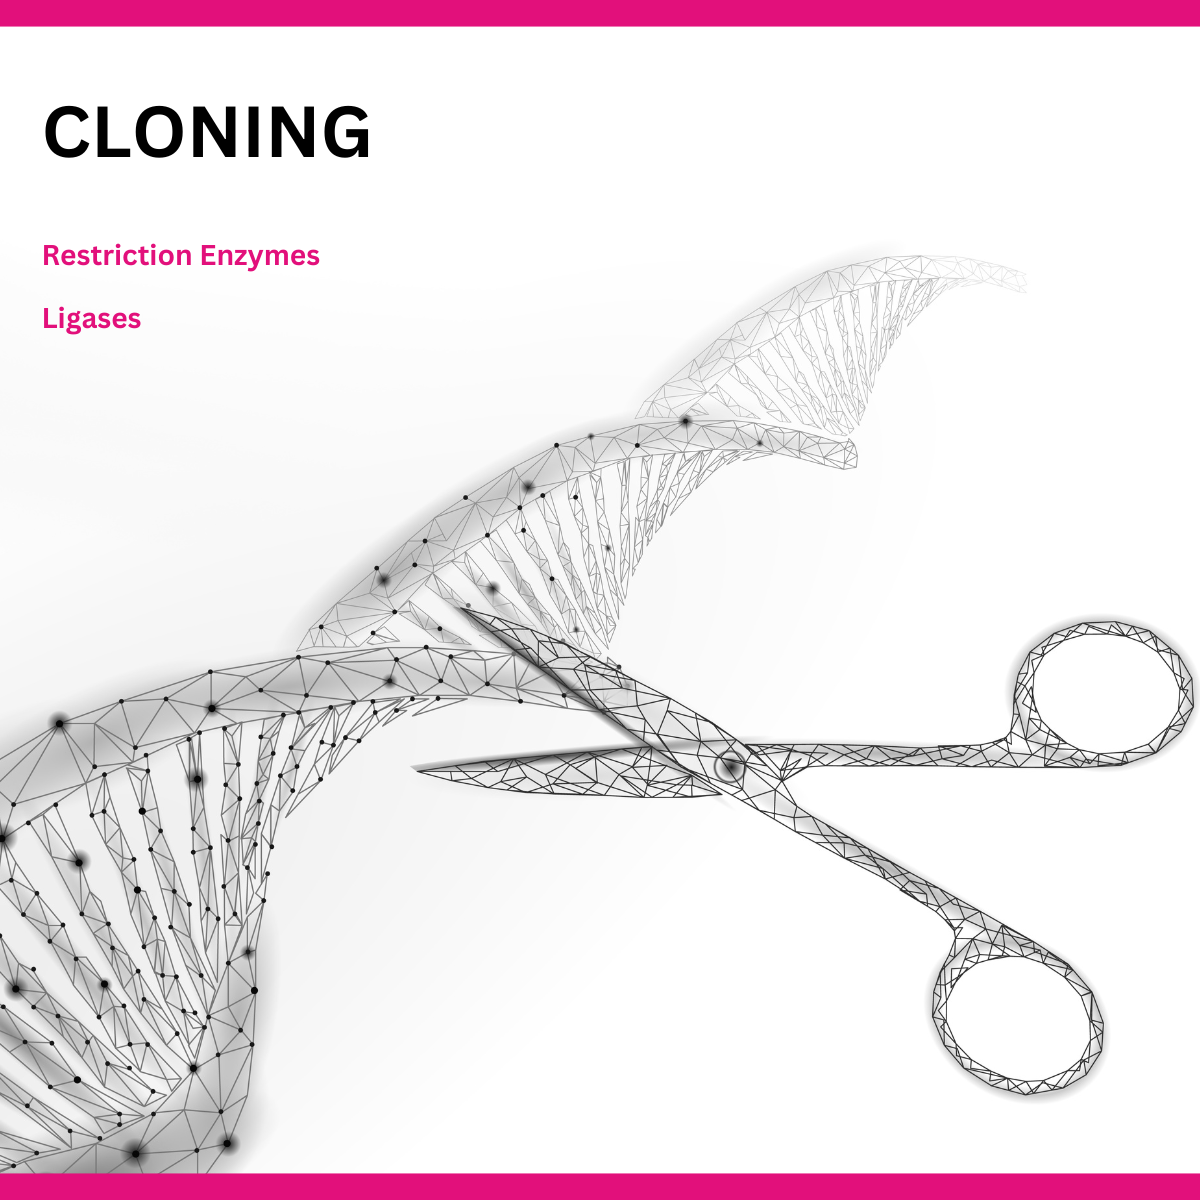 Cloning, Ligases, Restriction enzymes